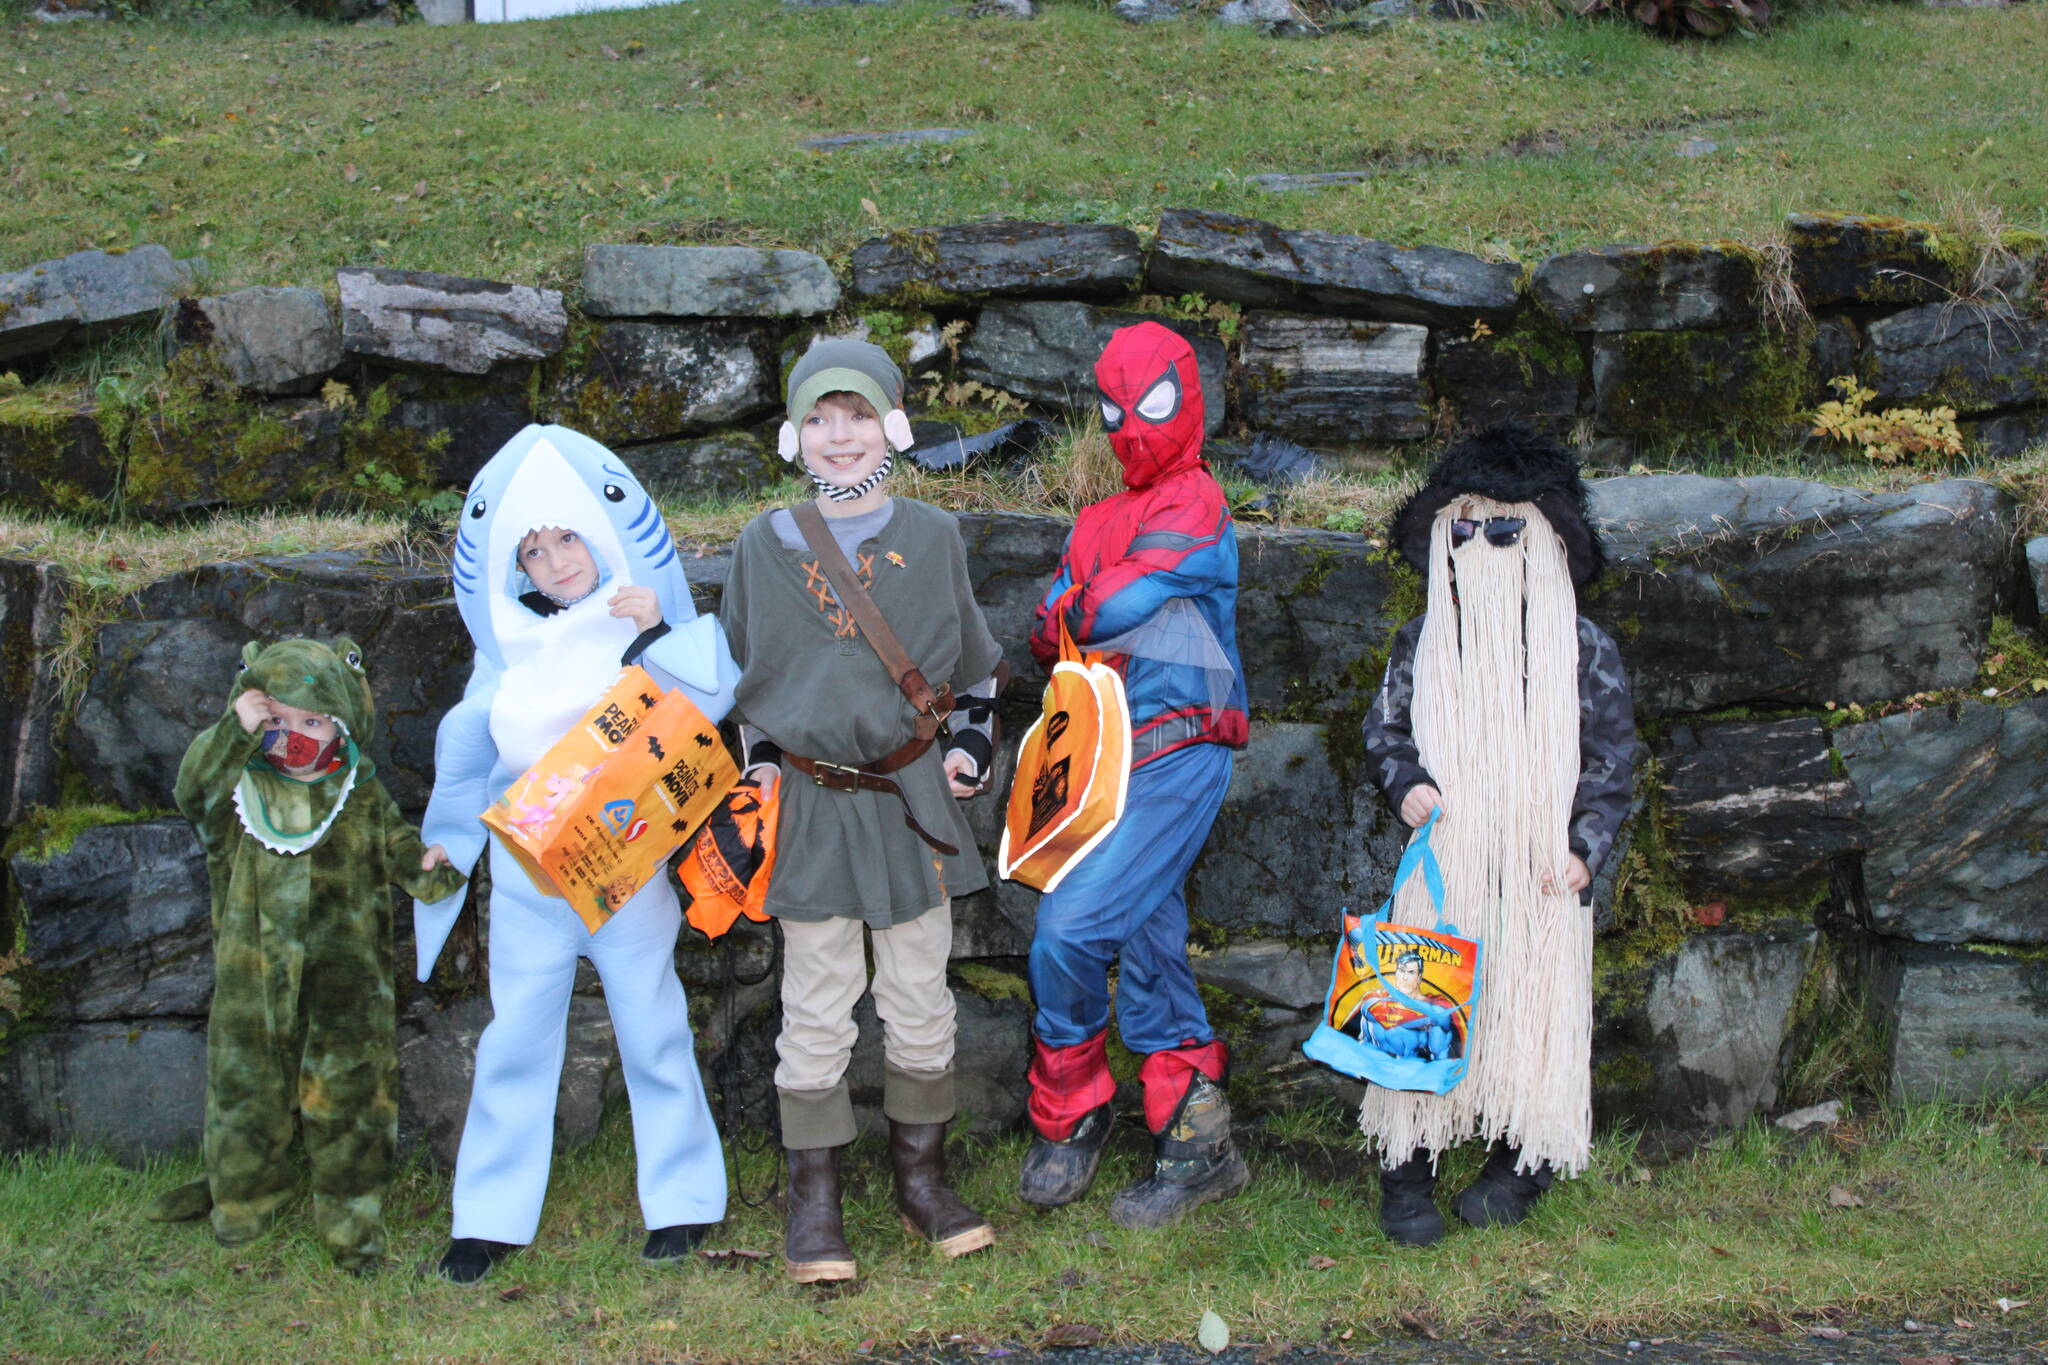 A dinosaur, a shark, an adventurer, Spider-Man, and Cousin It, gather on 5th Street in Douglas before heading down to the drive-through trick or treat event sponsored by the Douglas Fourth of July Committee on Saturday, Oct. 30. (Dana Zigmund/Juneau Empire)